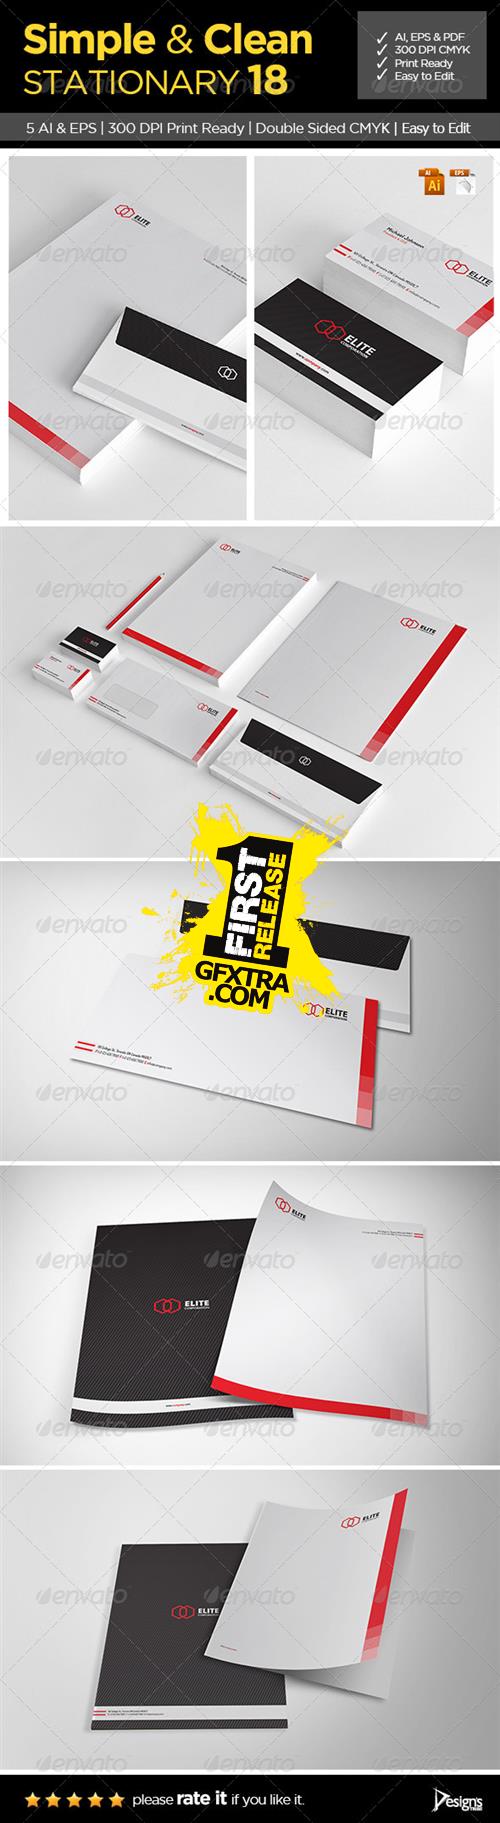 GraphicRiver - Simple and Clean Stationary 18